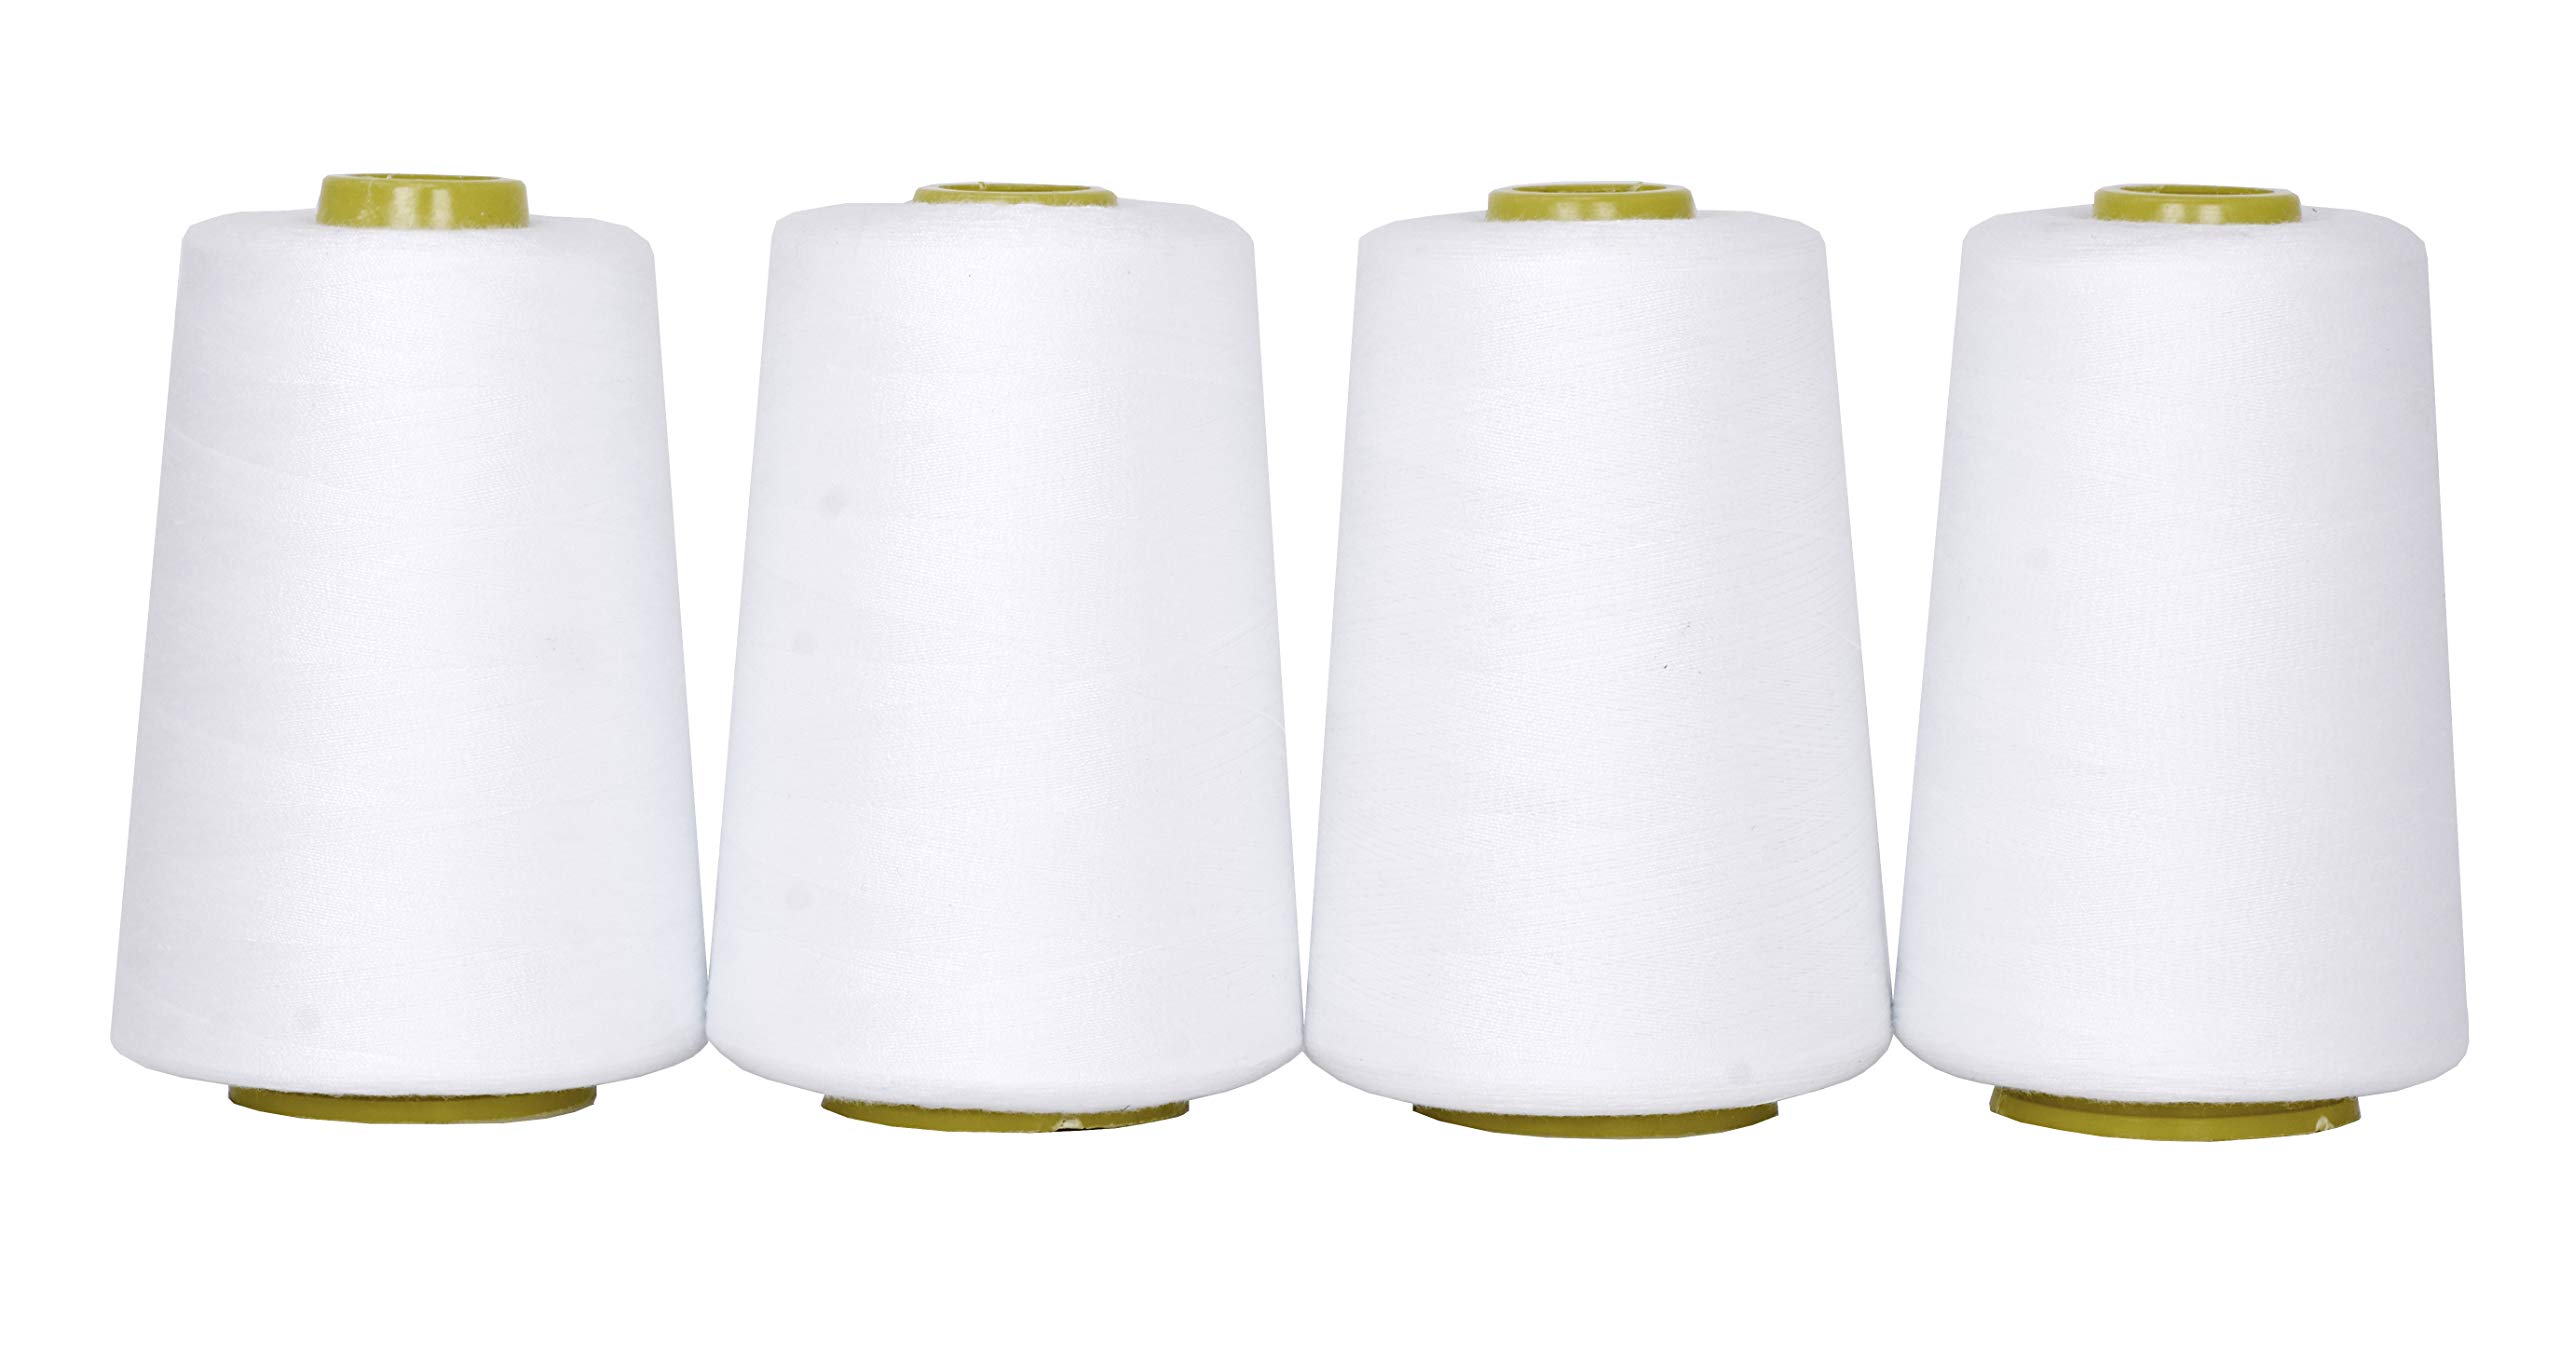 Mandala Crafts All Purpose Sewing Thread Spools - White Serger Thread Cones  4 Pack - 40S/2 24000